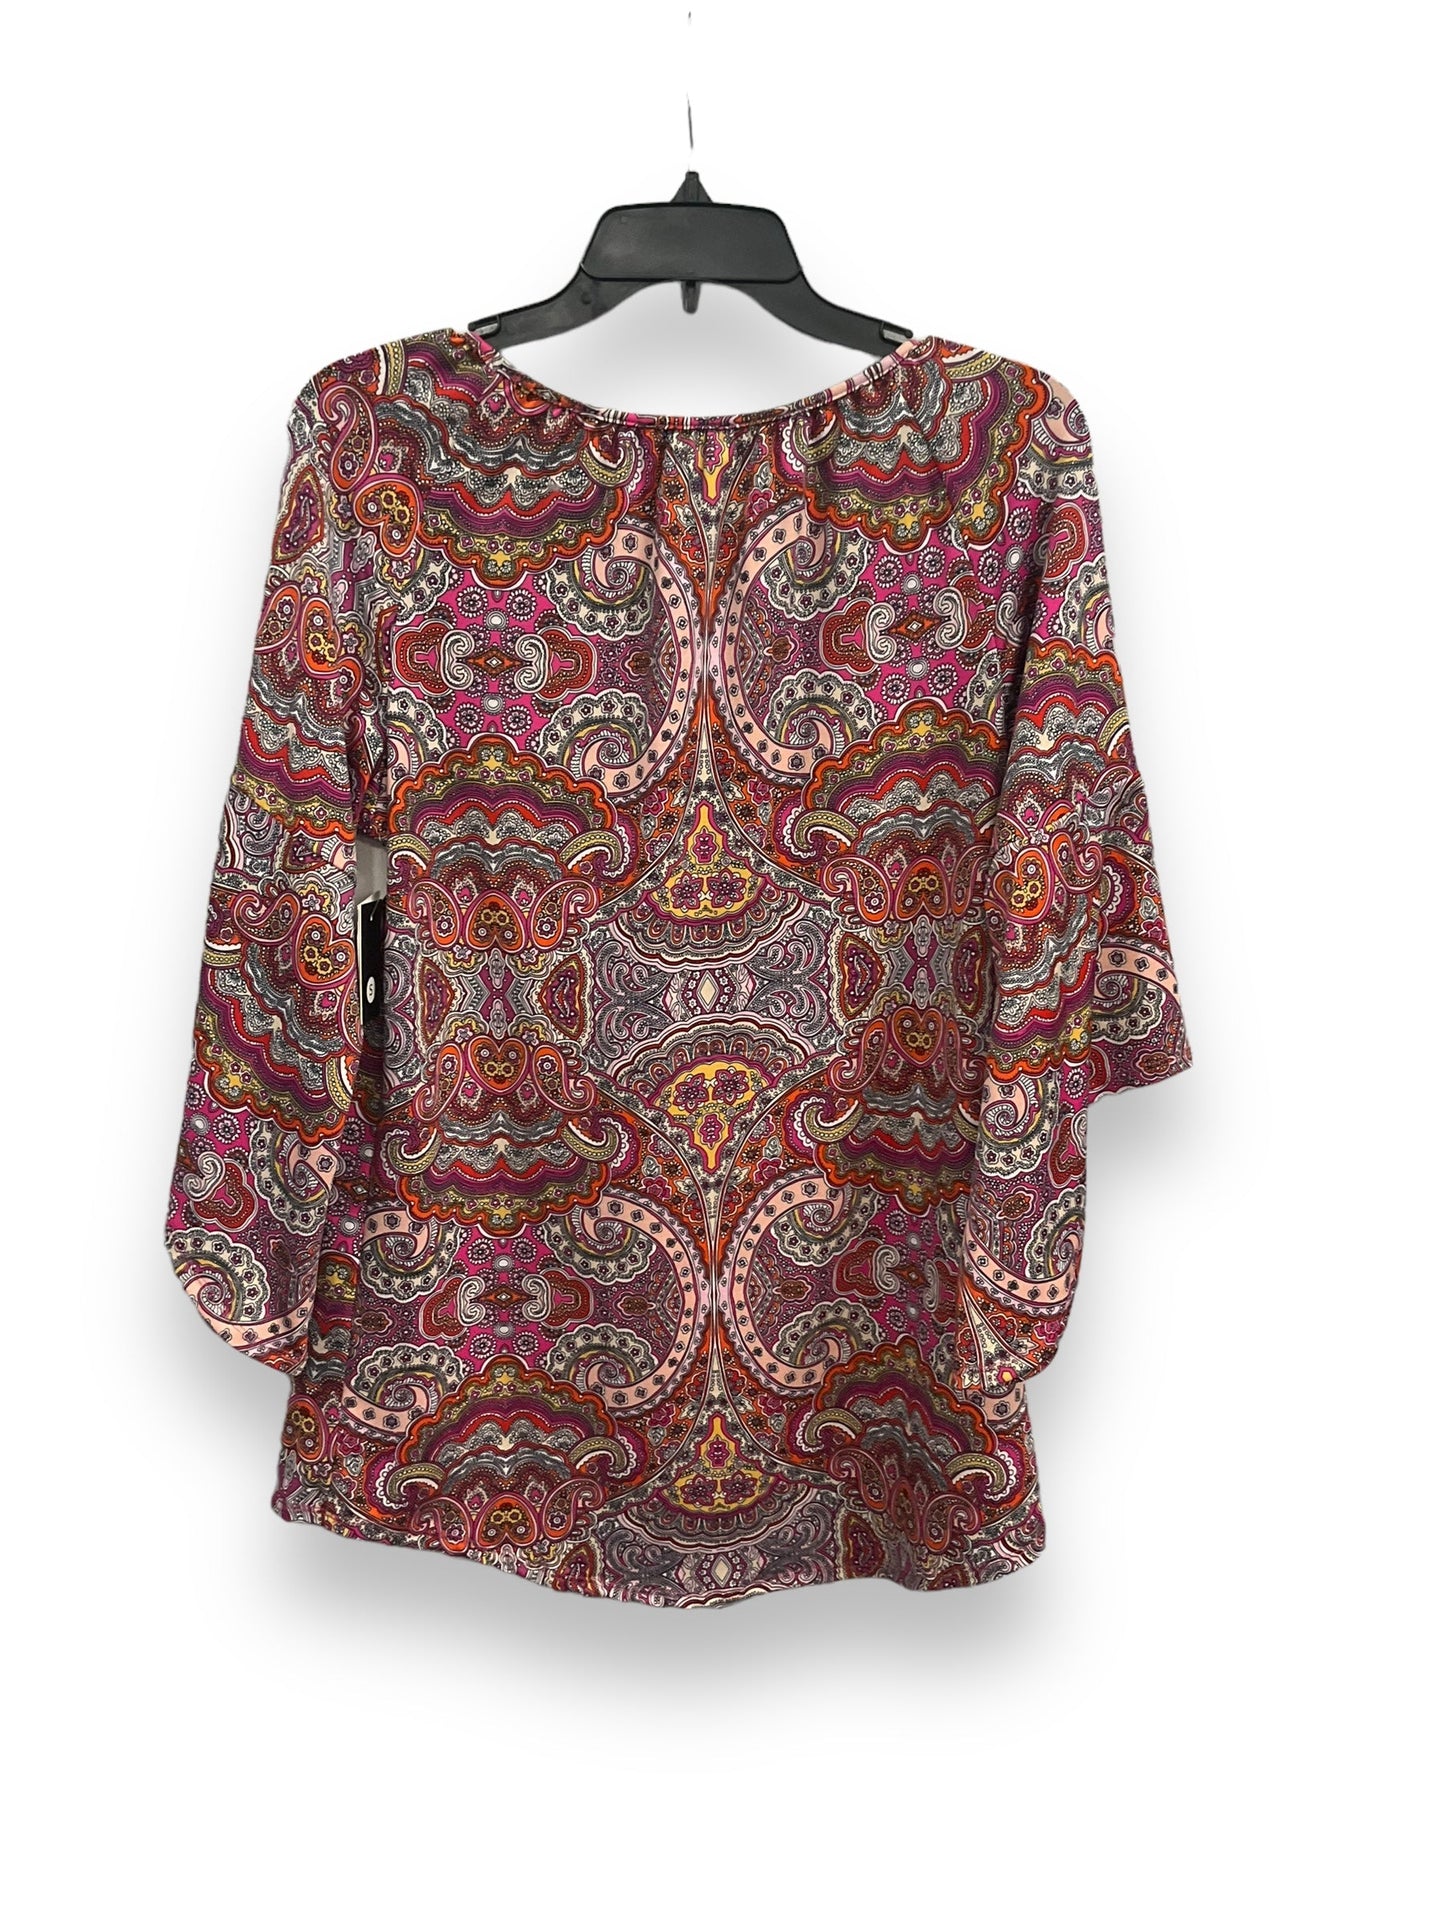 Multi-colored Top 3/4 Sleeve Tacera, Size S